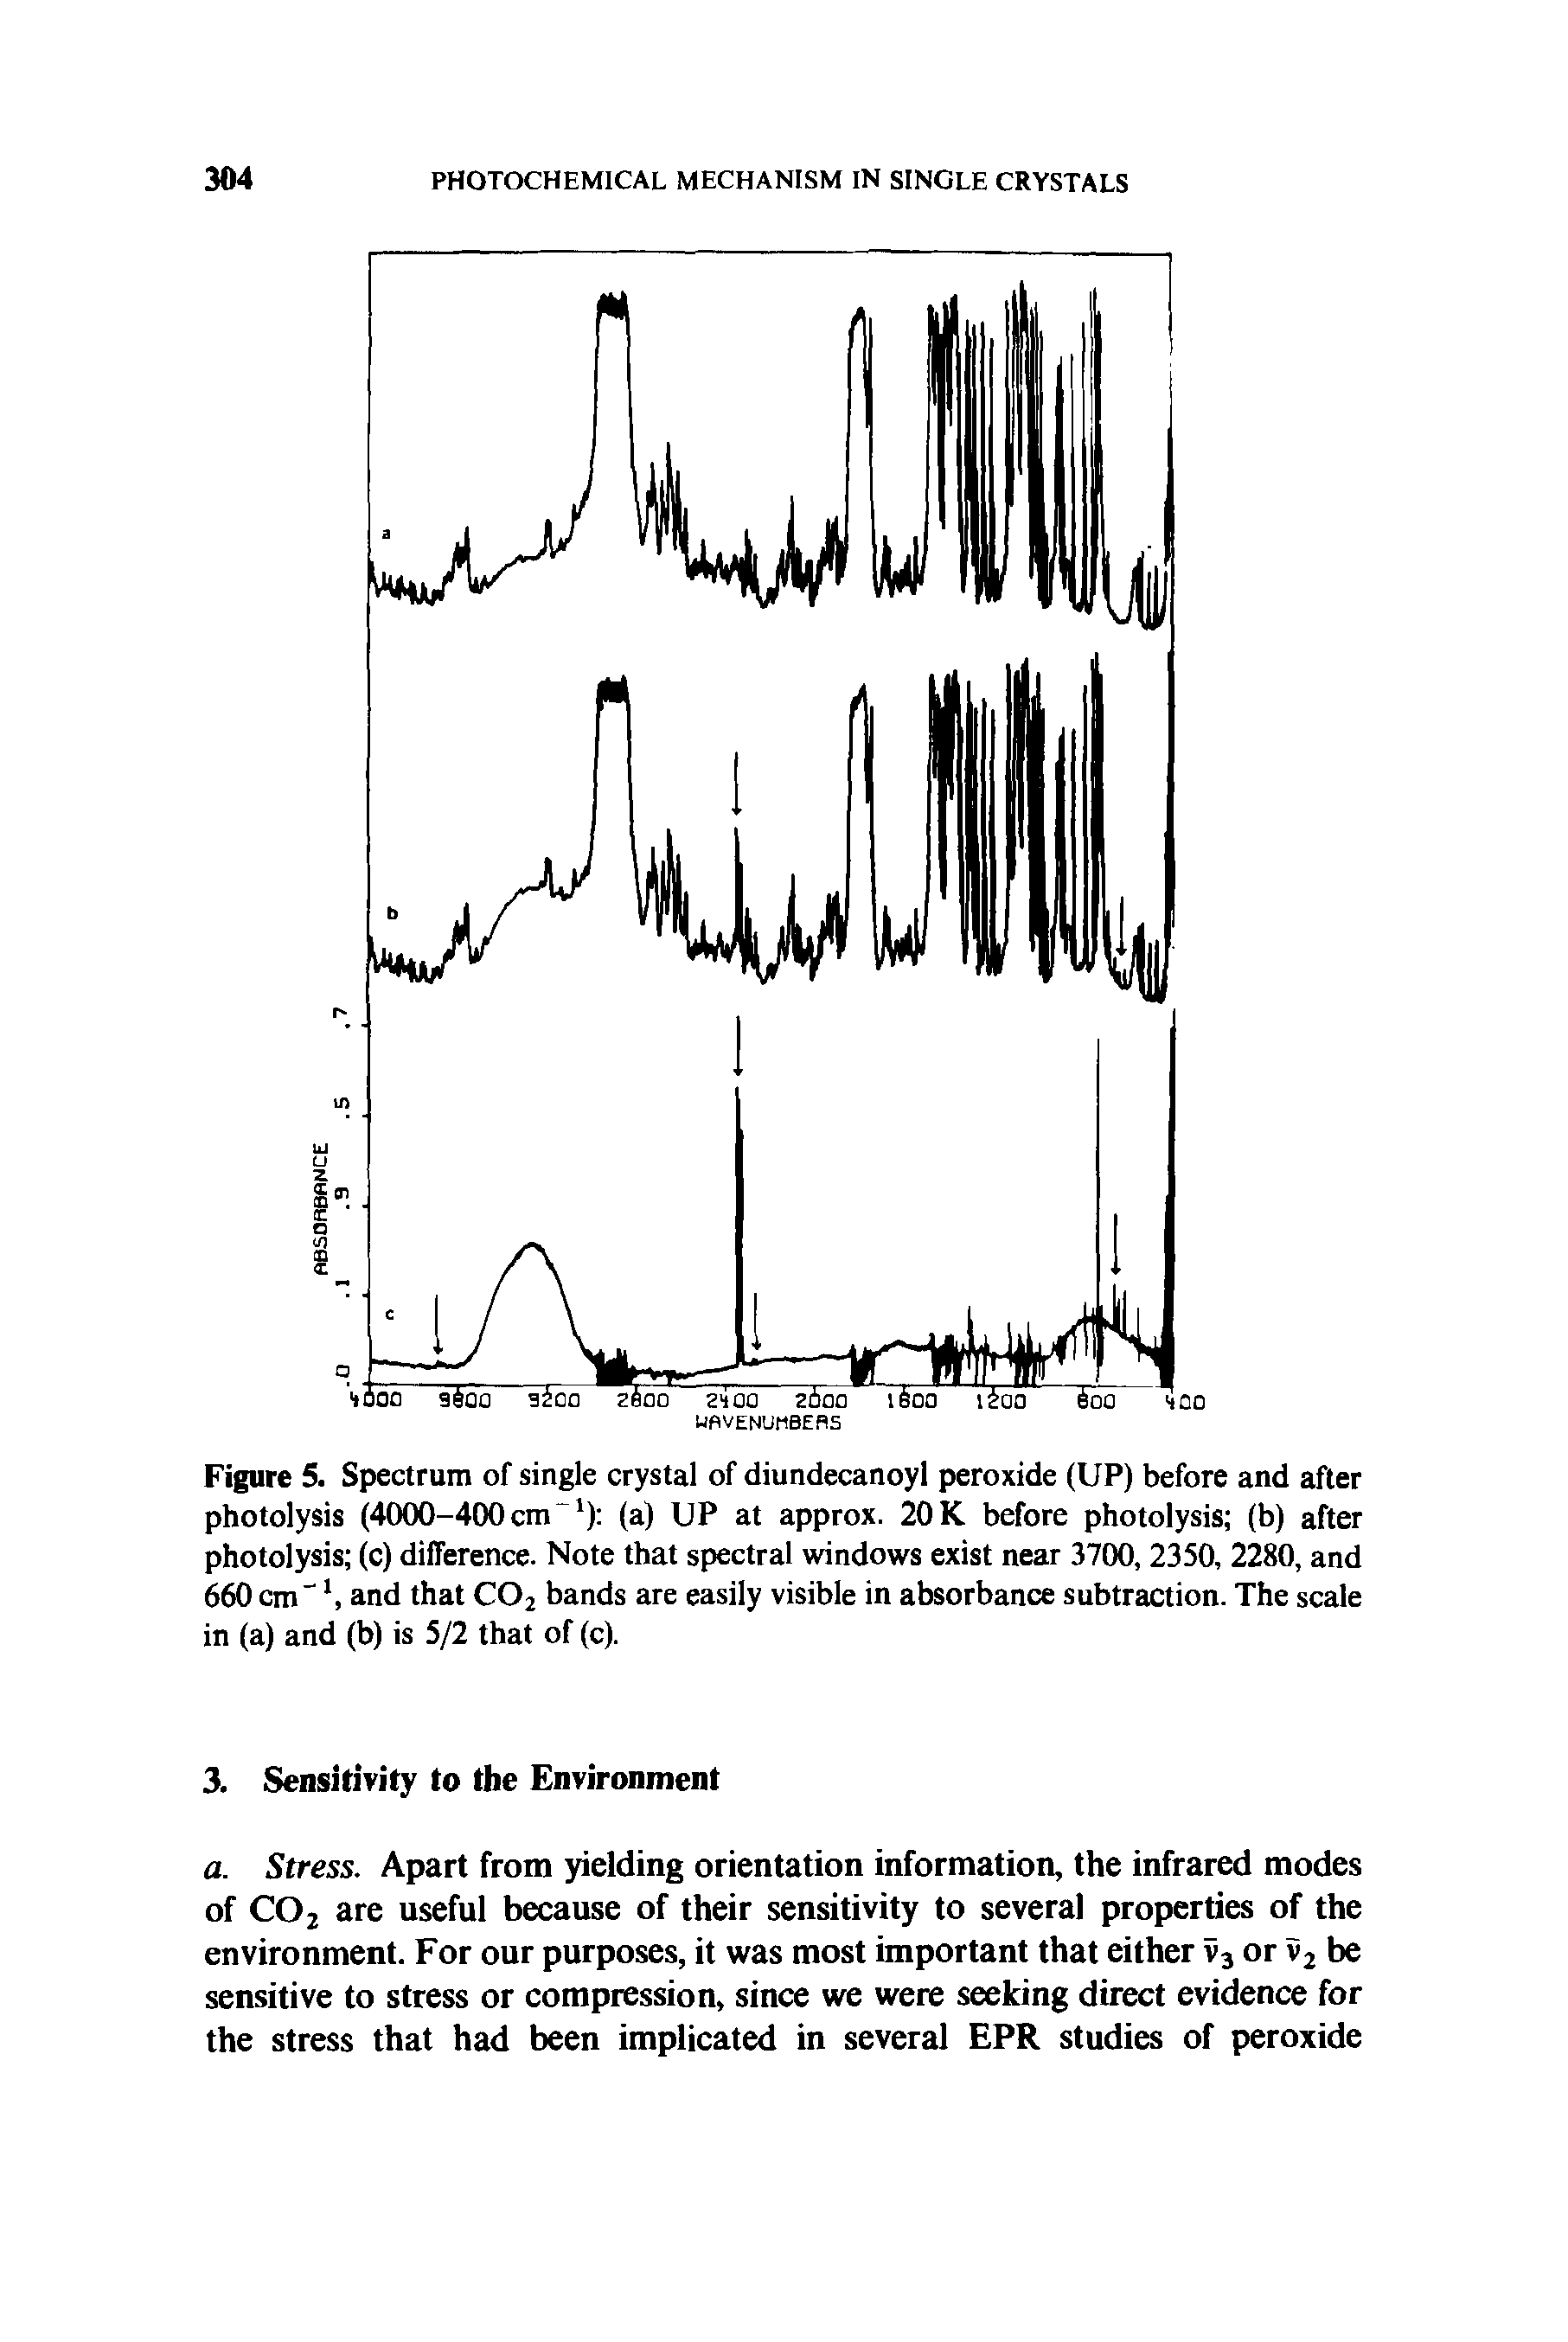 Figure 5. Spectrum of single crystal of diundecanoyl peroxide (UP) before and after photolysis (4000-400 cm 1) (a) UP at approx. 20 K before photolysis (b) after photolysis (c) difference. Note that spectral windows exist near 3700, 2350, 2280, and 660 cm 1, and that C02 bands are easily visible in absorbance subtraction. The scale in (a) and (b) is 5/2 that of (c).